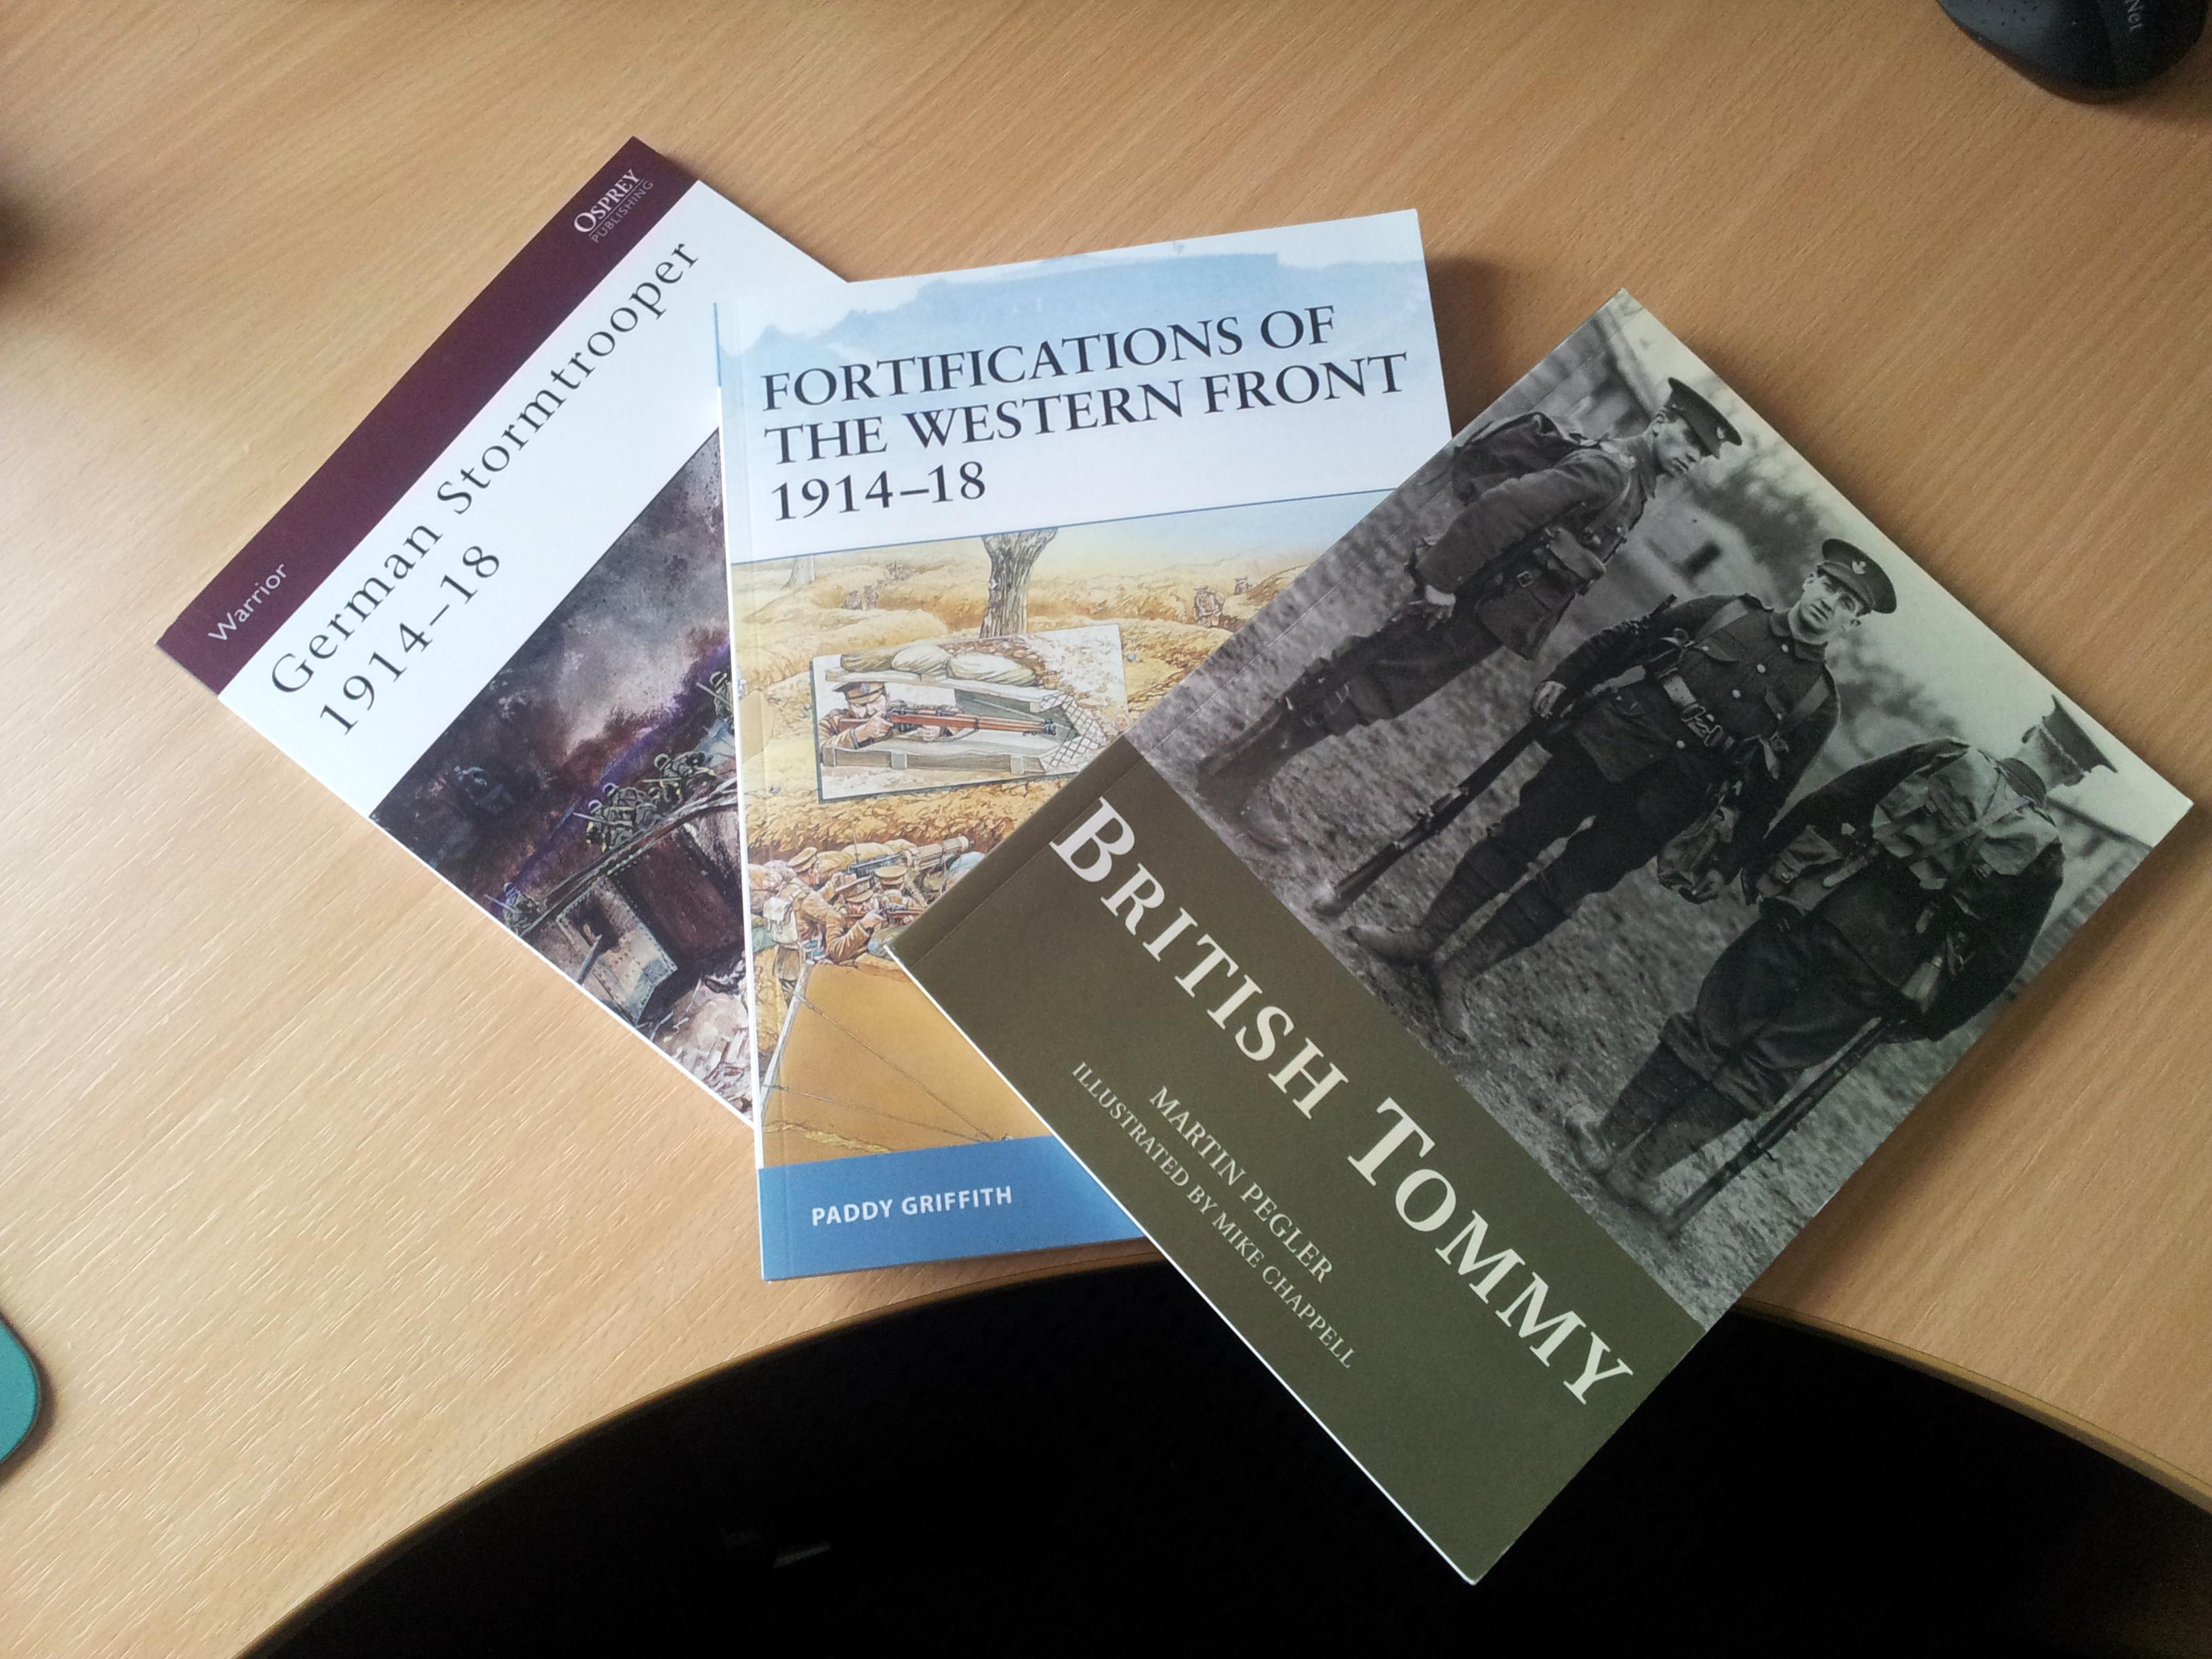 New reference books